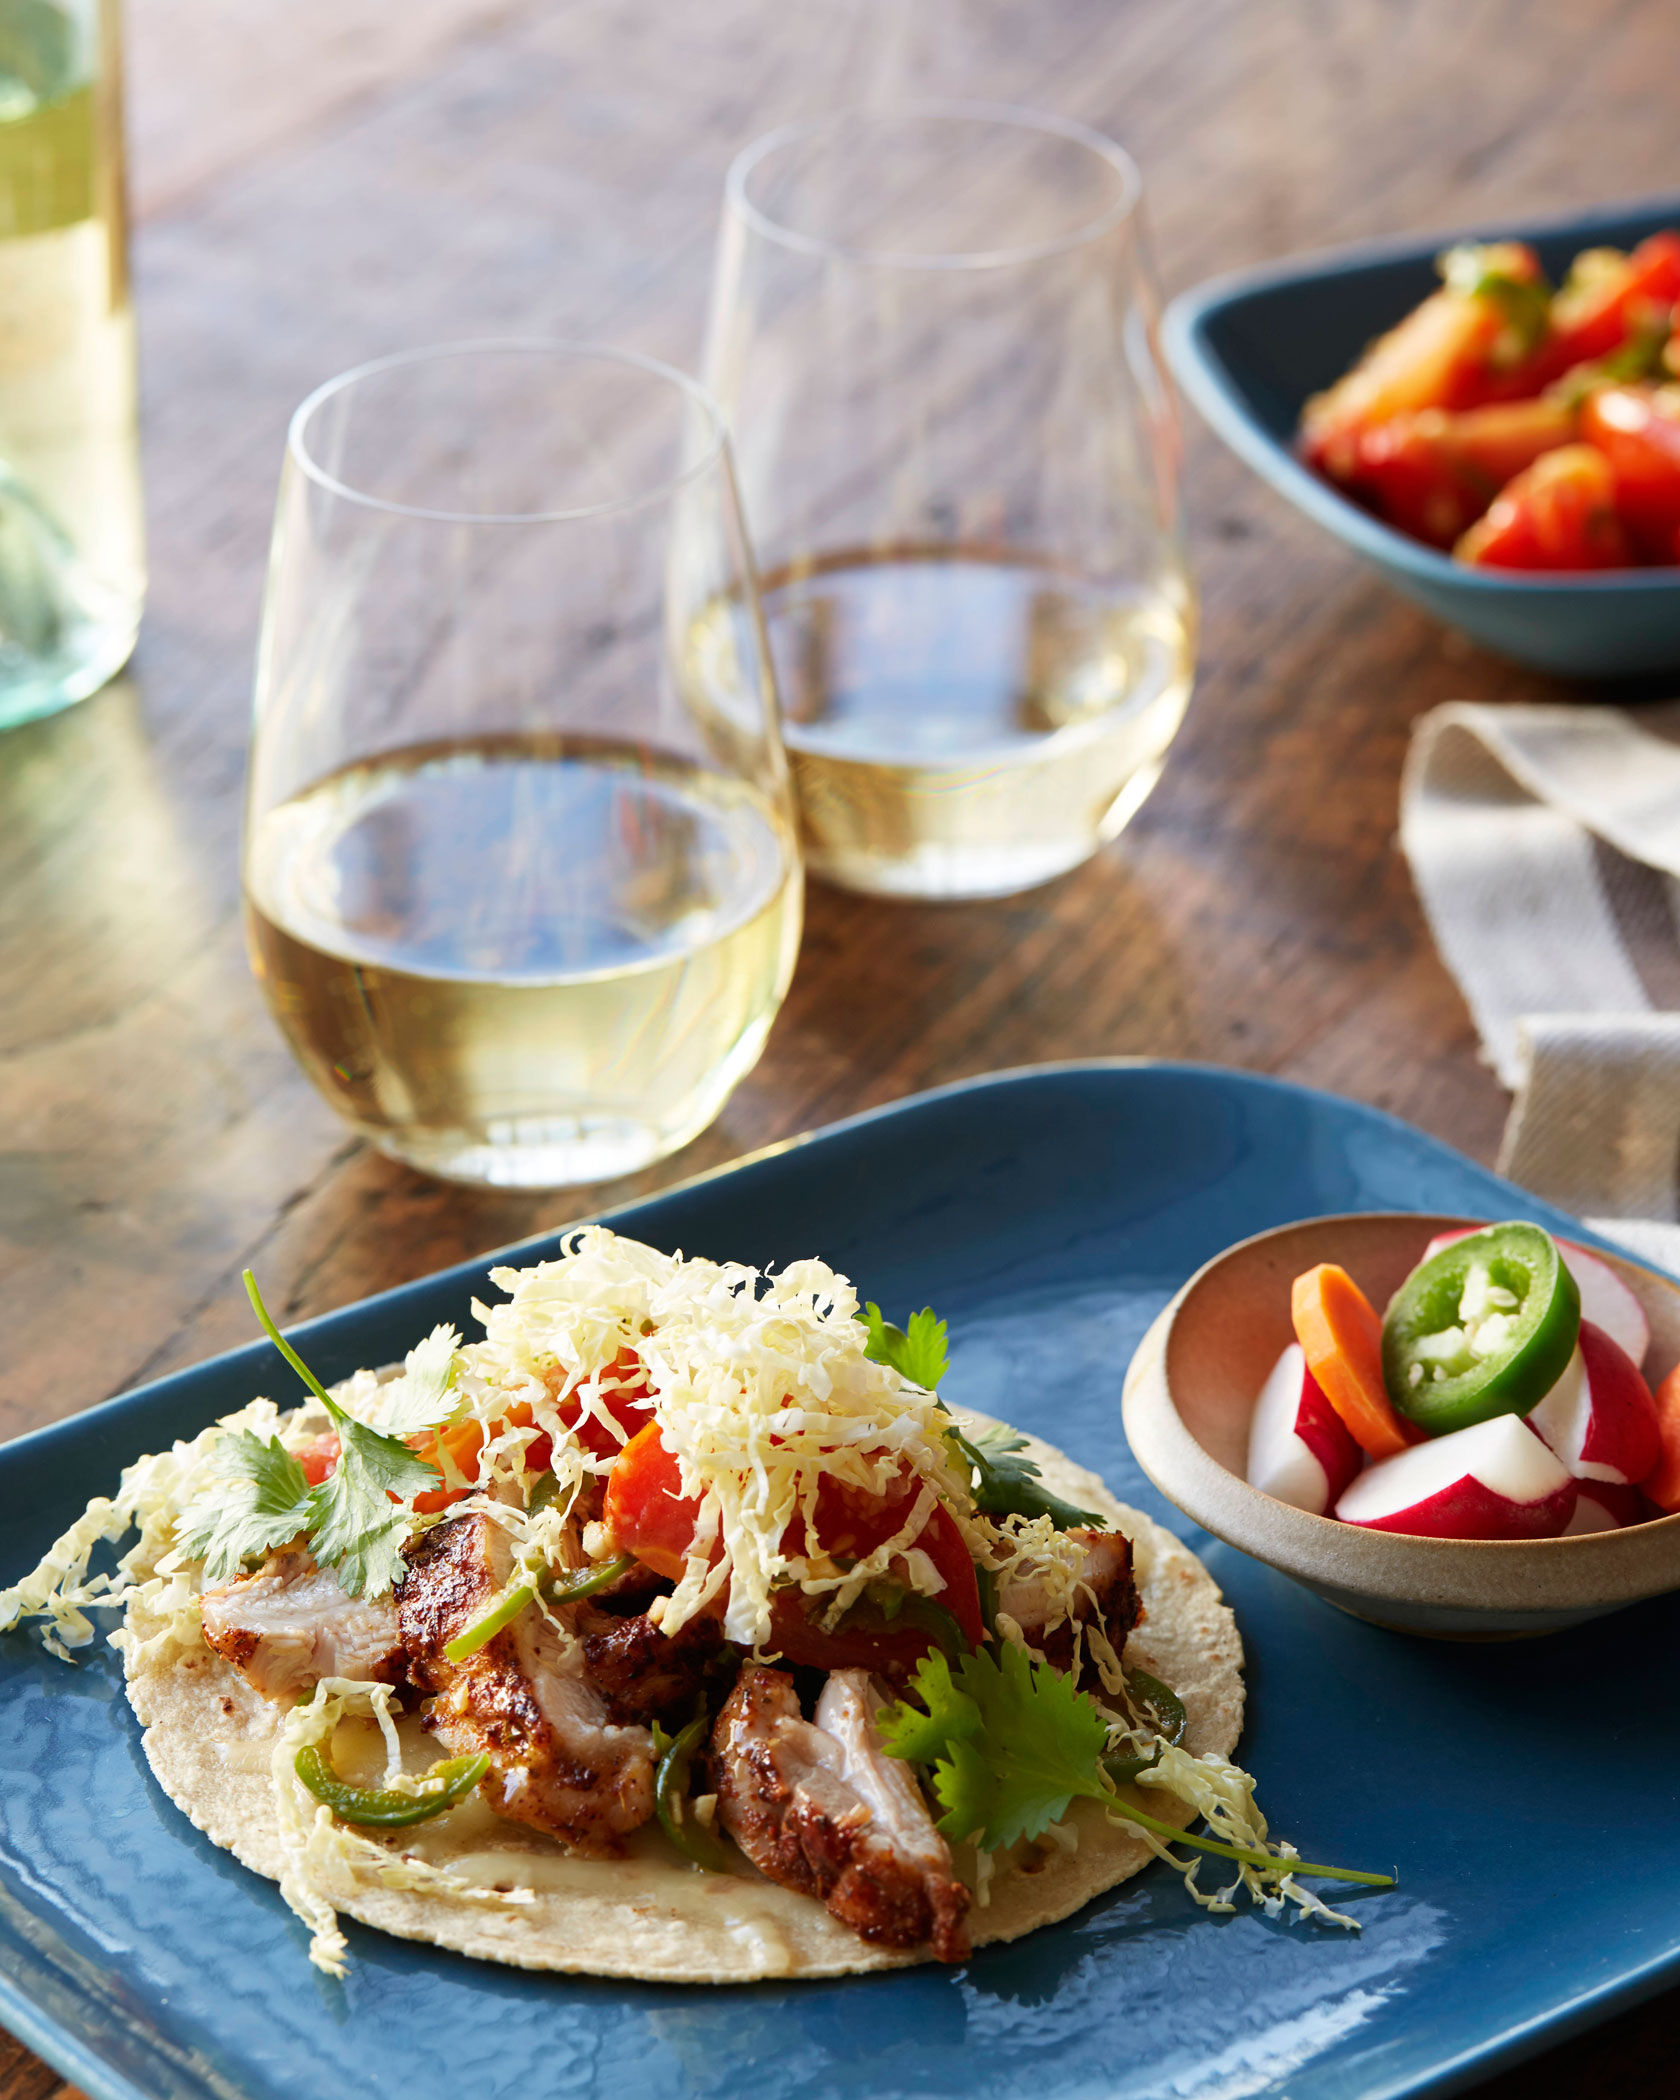 Spice-Rubbed Chicken Tacos with Shredded Napa Cabbage, Cilantro and Monterey Jack Cheese